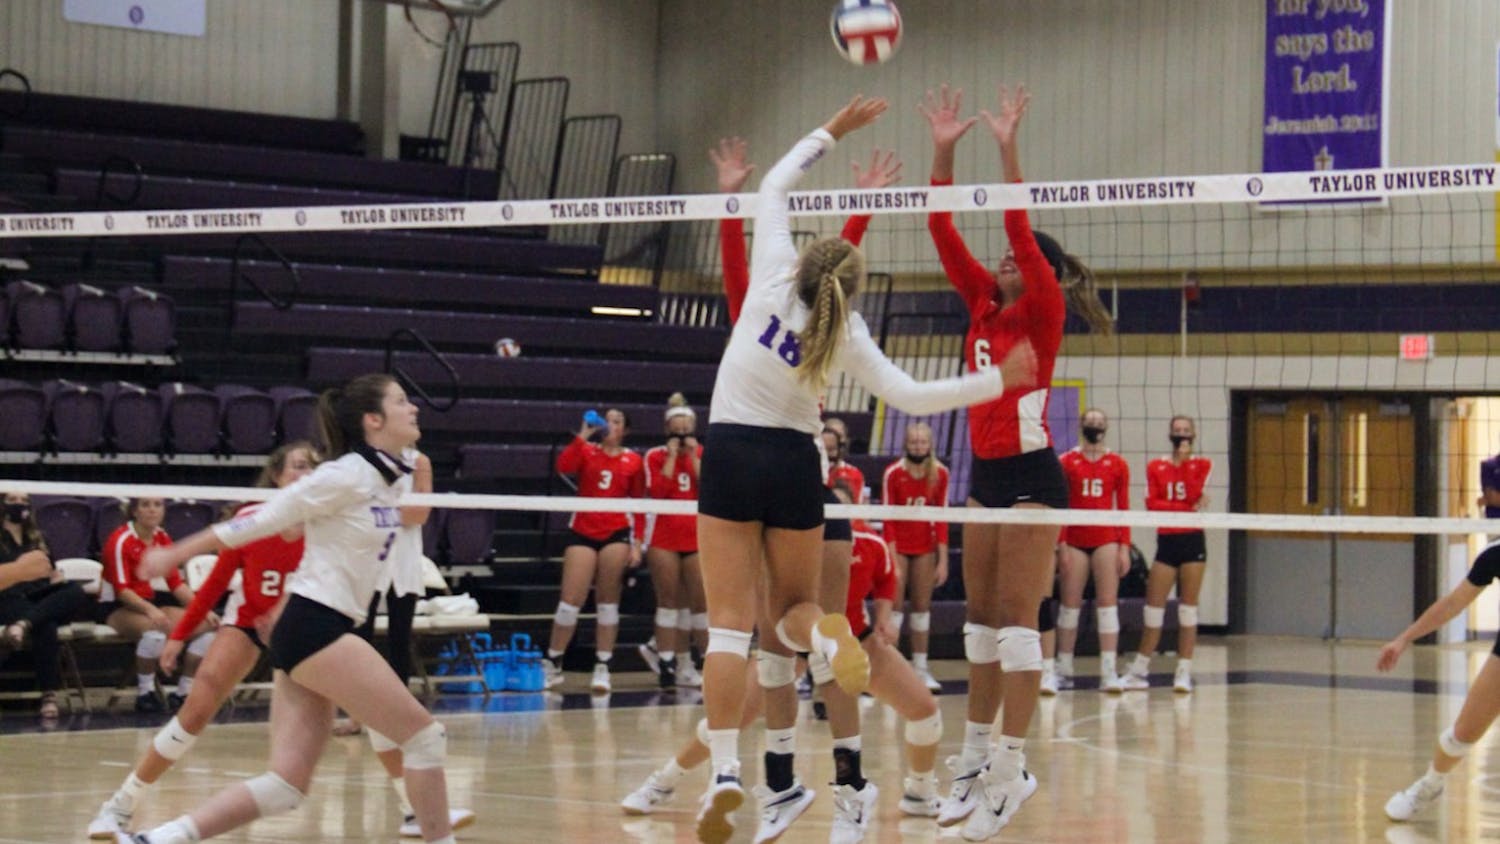 Taylor volleyball lost to Grace but defeated Huntington last week